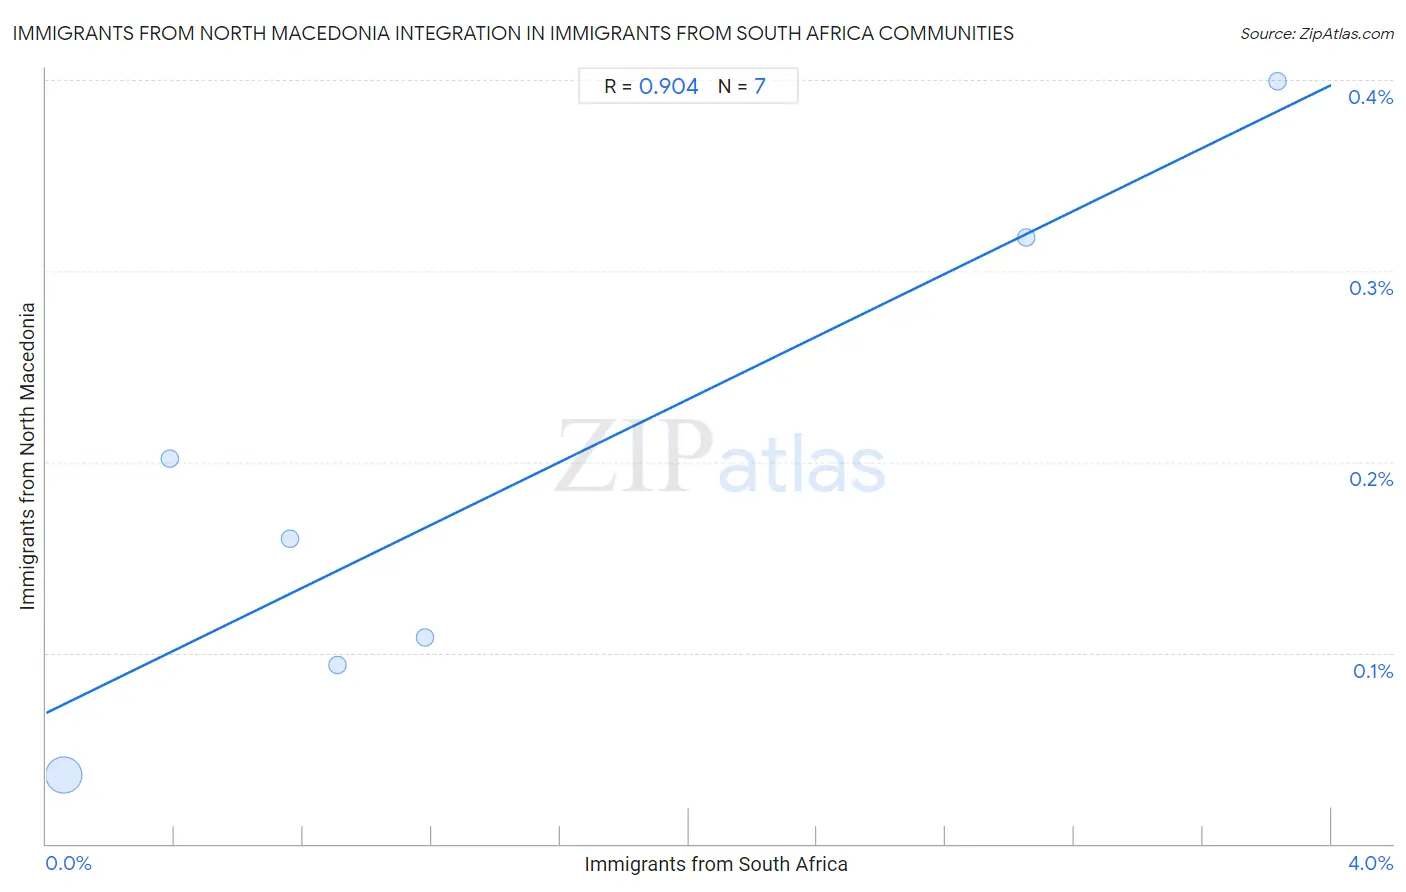 Immigrants from South Africa Integration in Immigrants from North Macedonia Communities